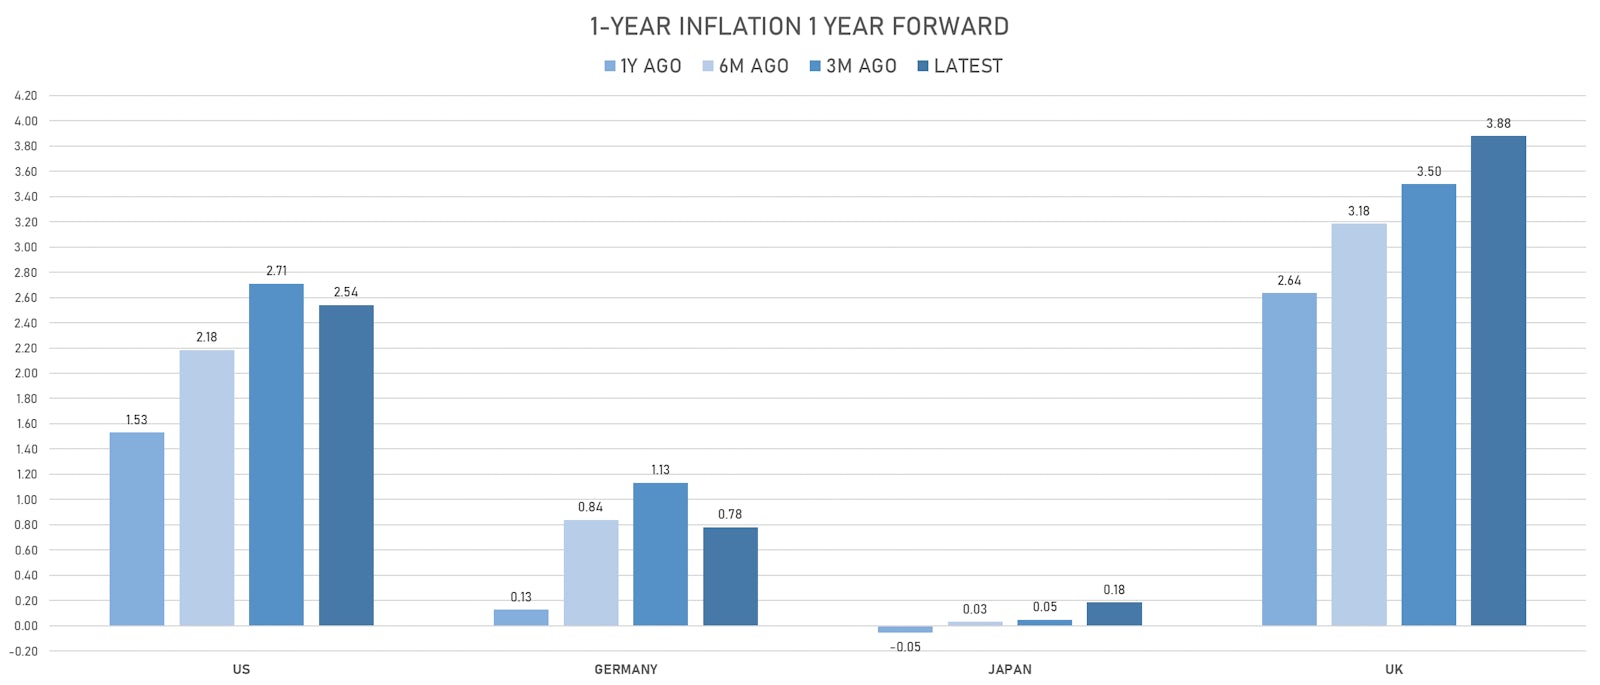 1-Year Inflation 1 Year Forward in the US, Germany, Japan, UK | Sources: ϕpost, Refinitiv data